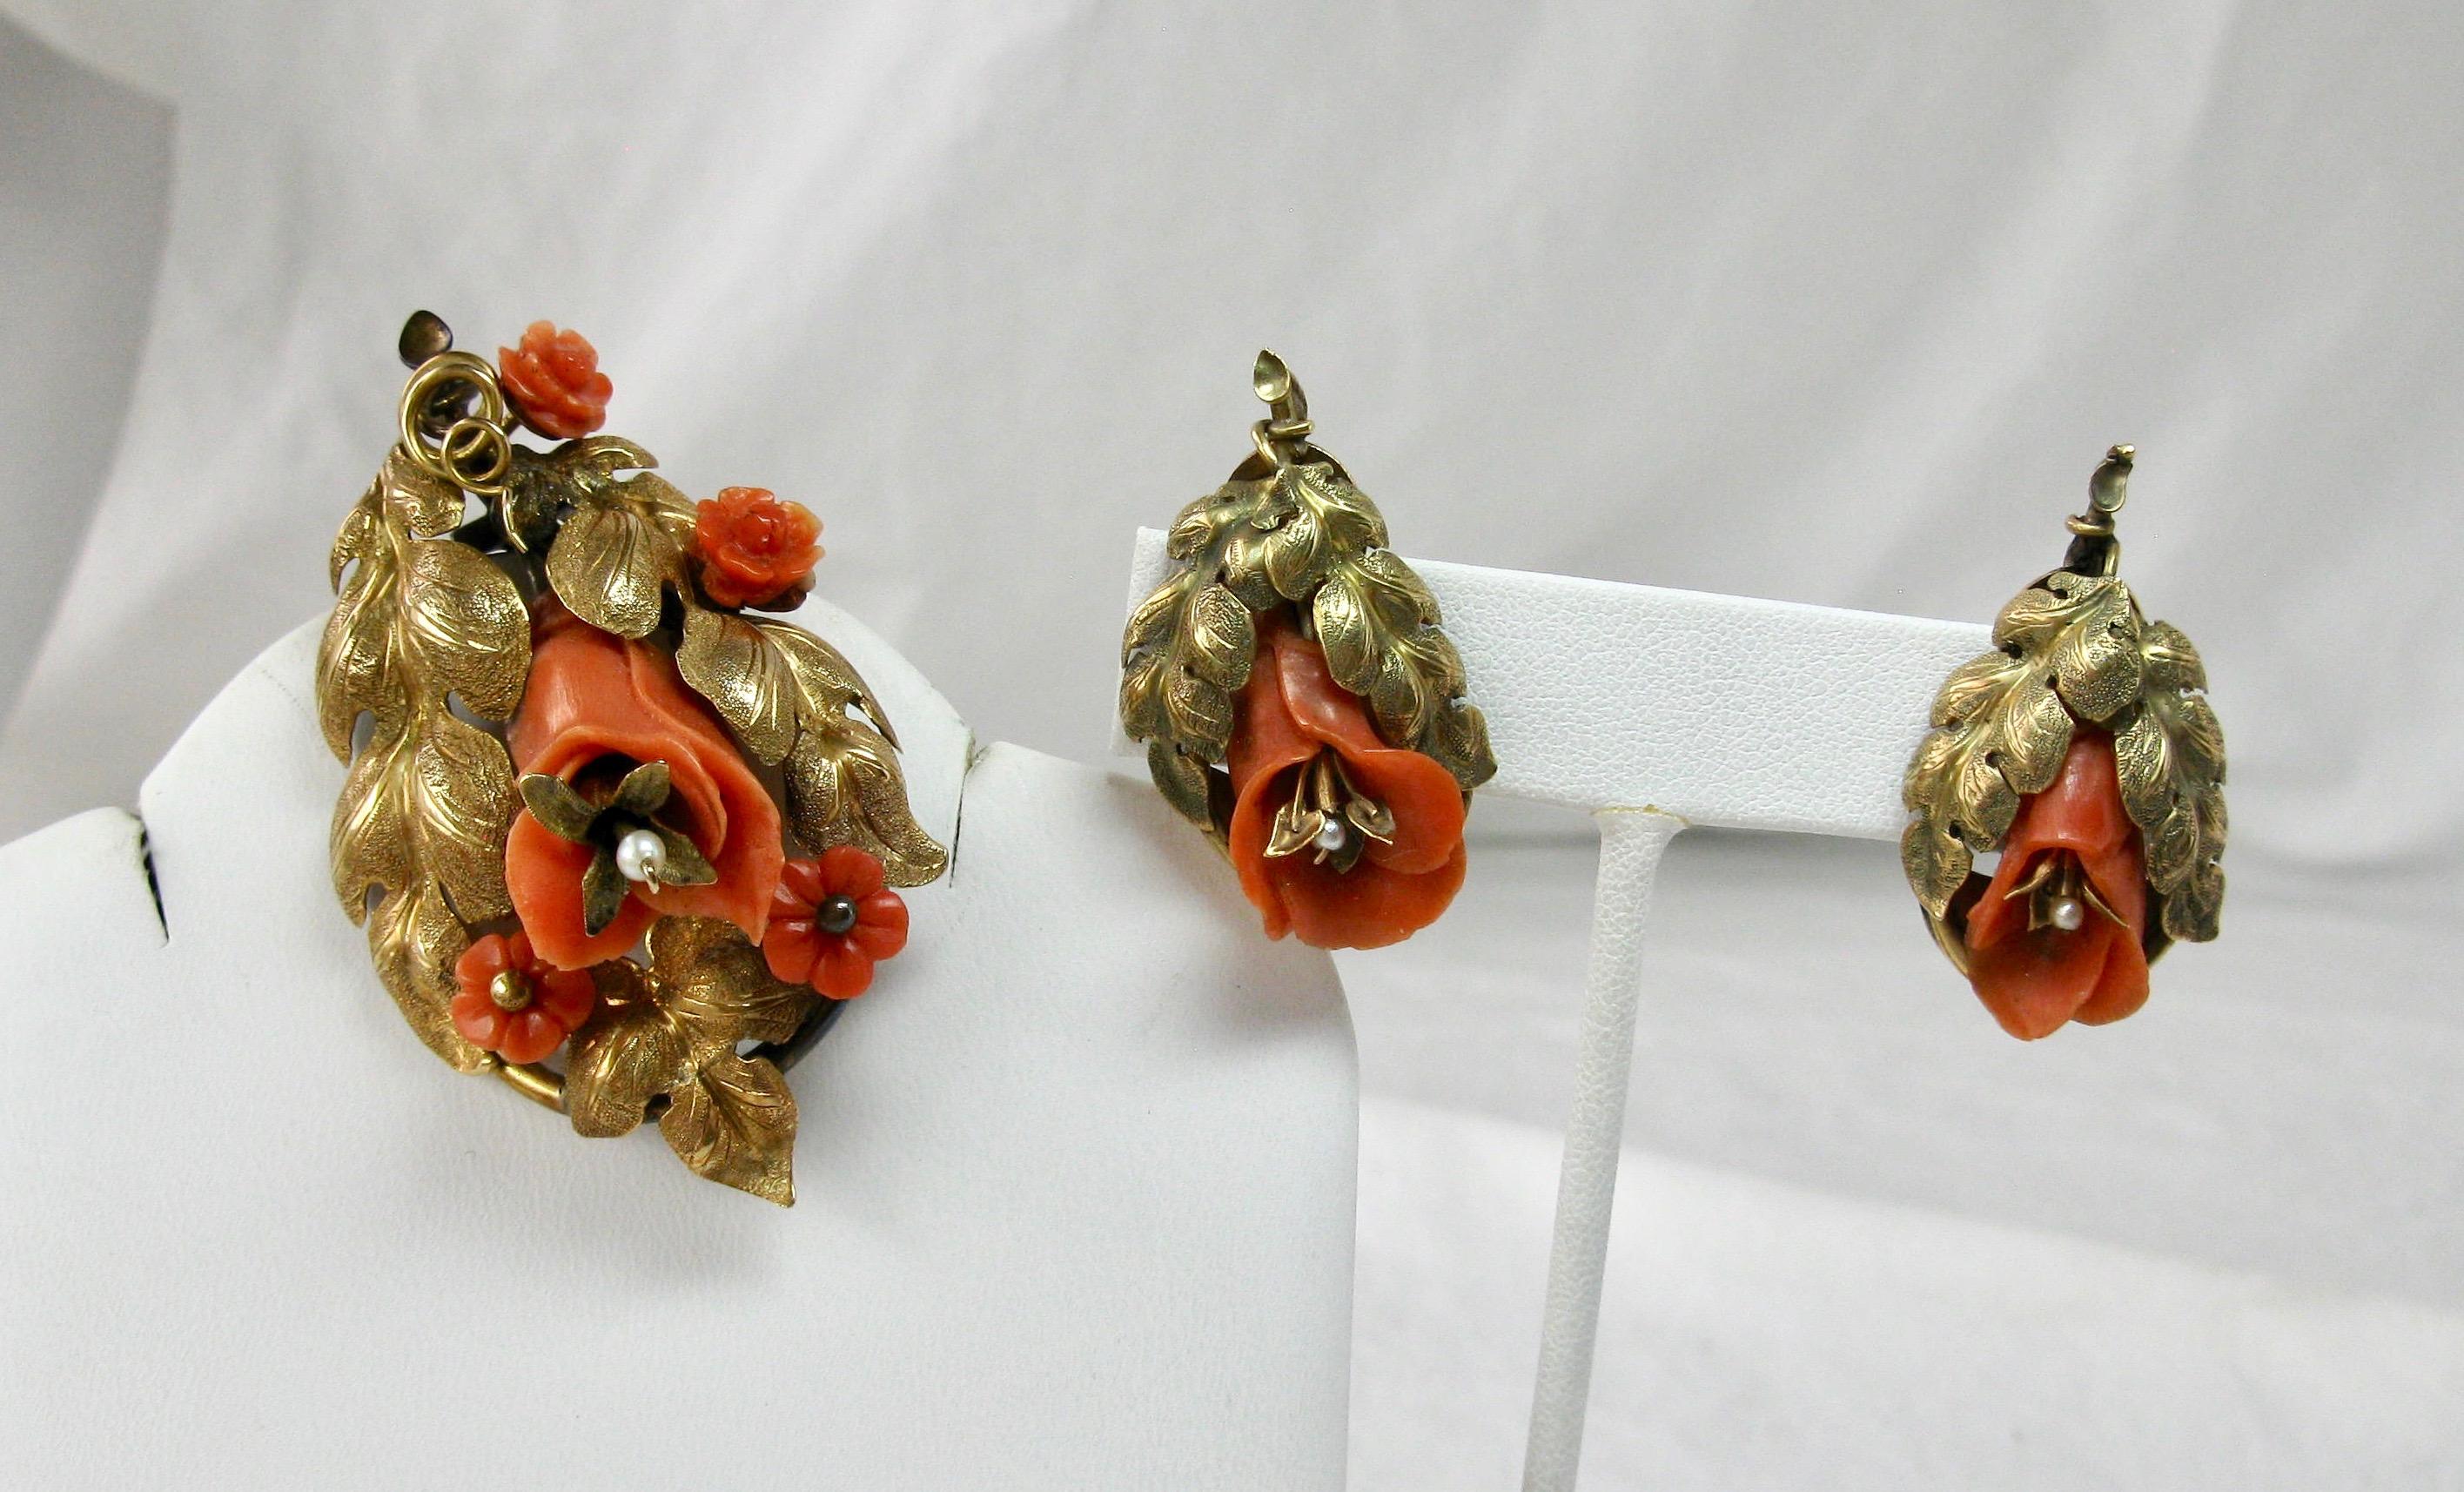 This is a rare pair of museum quality Etruscan Revival Victorian Coral Earrings and Brooch.  The parure set has gorgeous hand carved three dimensional flowers of natural coral.  The carving of the flowers is absolutely exquisite!  The larger flowers